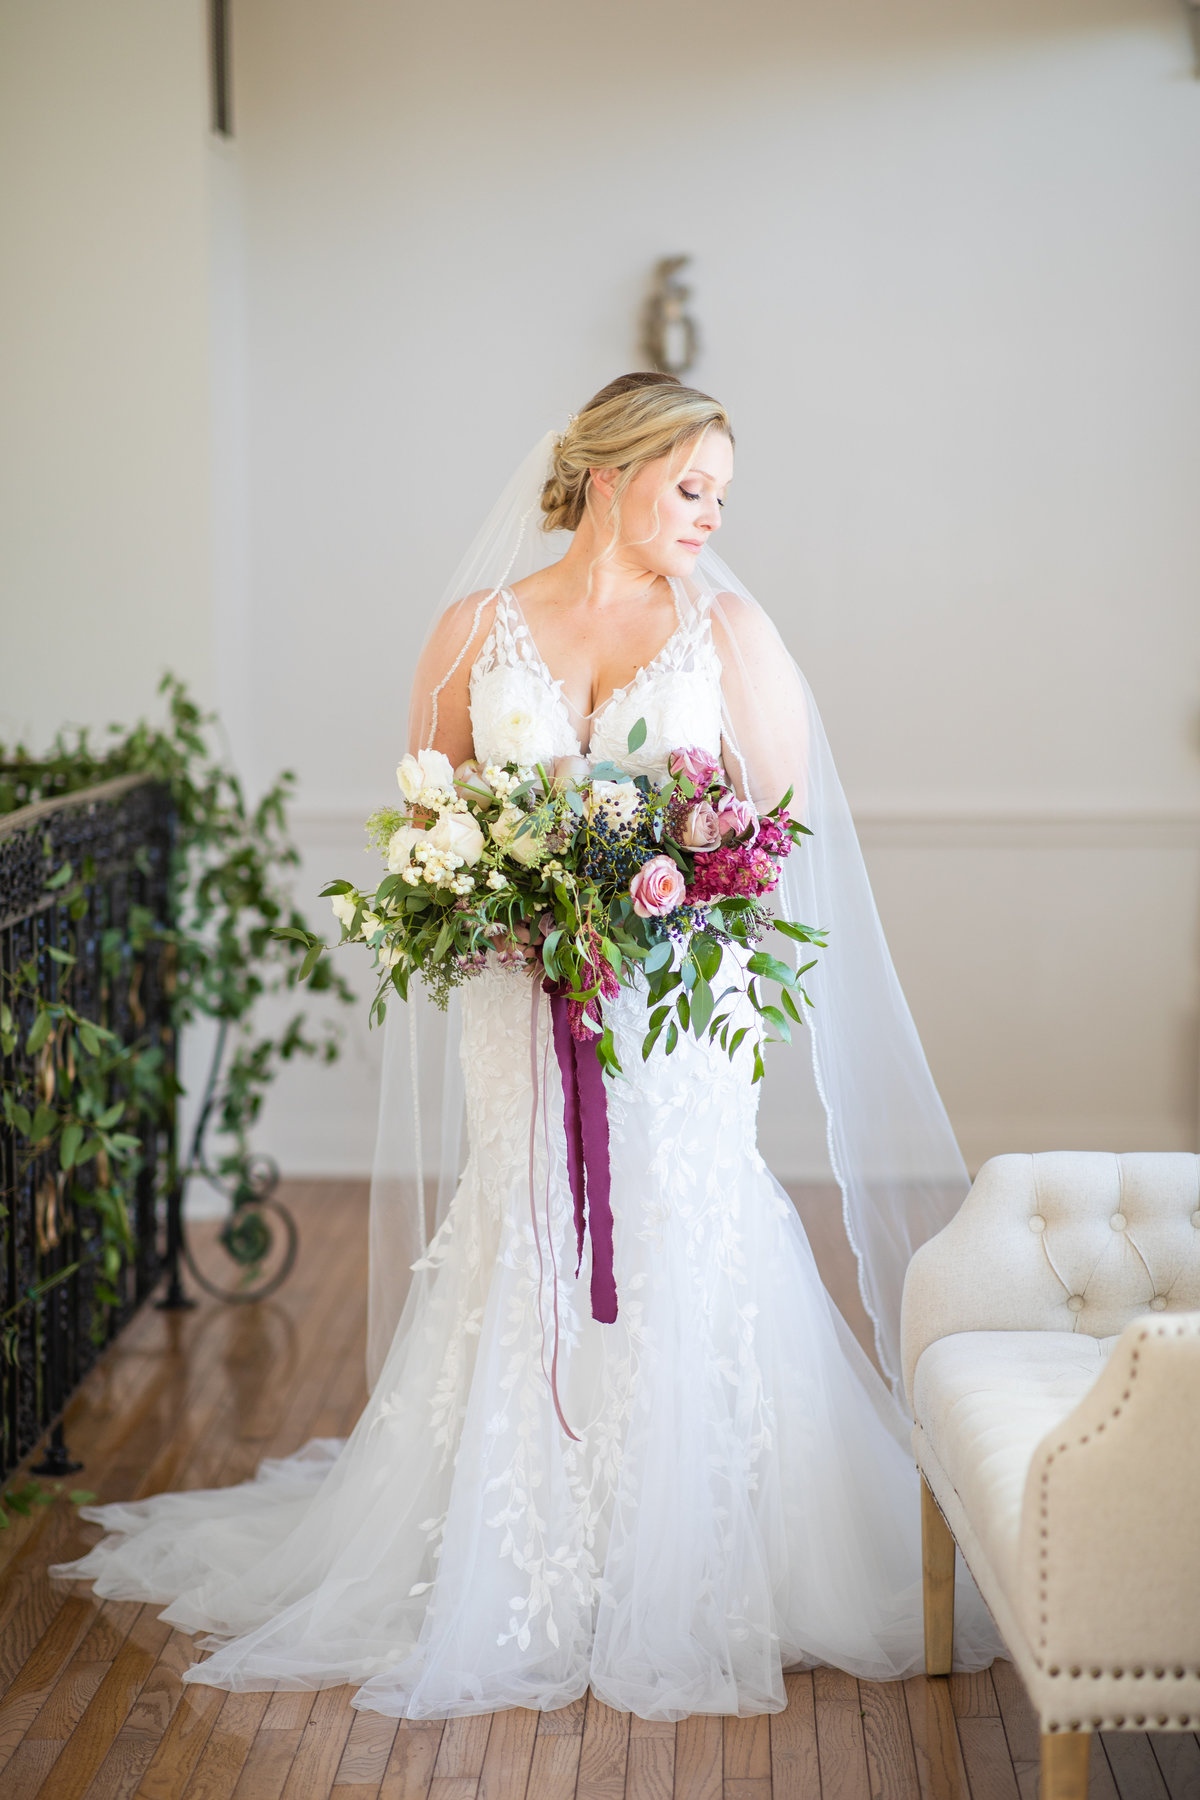 Stefanie Kamerman Photography - Sweetly Southern Events LLC Styled Shoot - The Manor at Airmont - Round Hill, VA-253